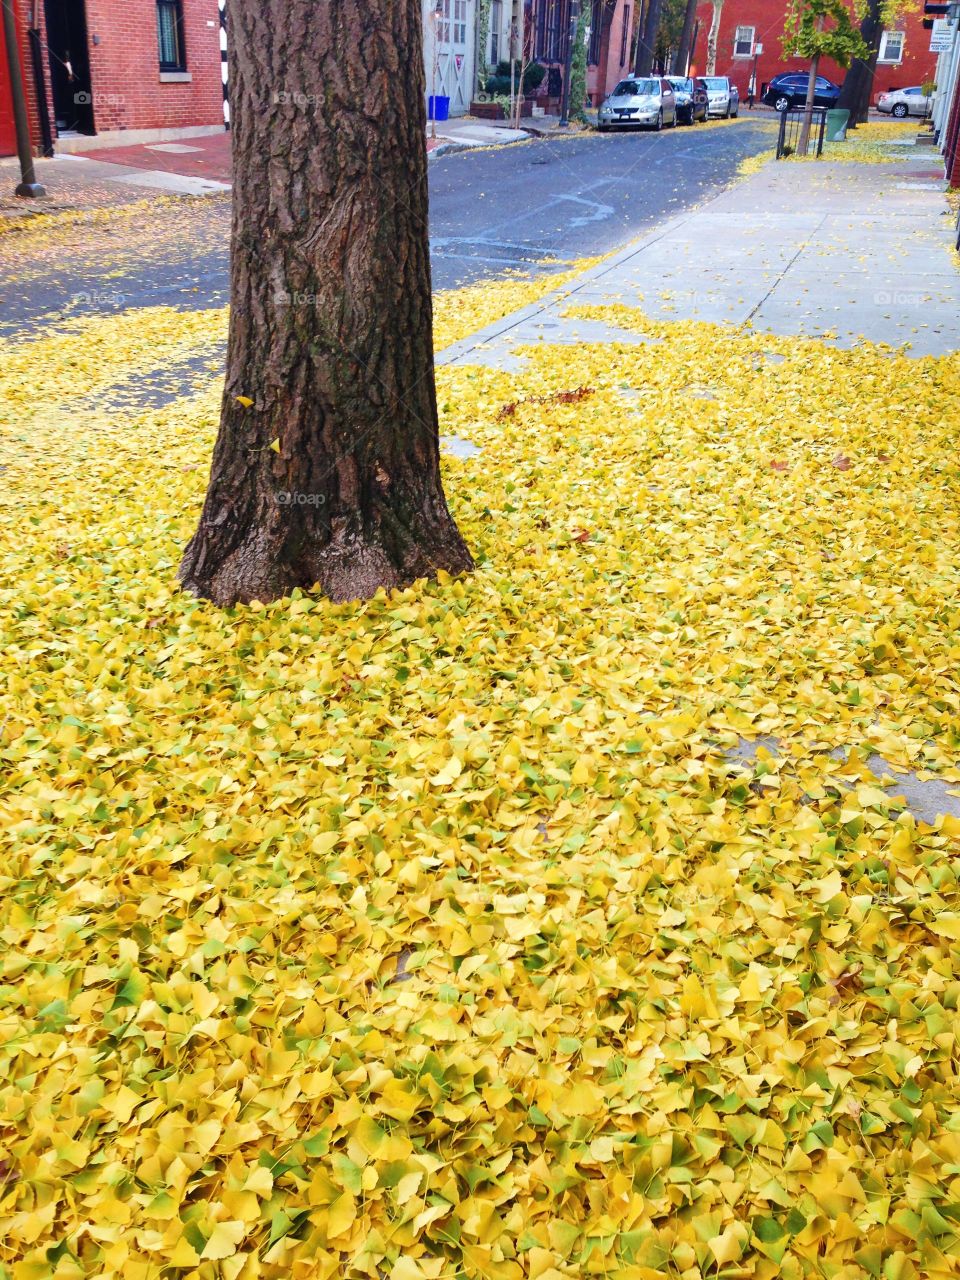 The yellow brick road. Fall in Philly